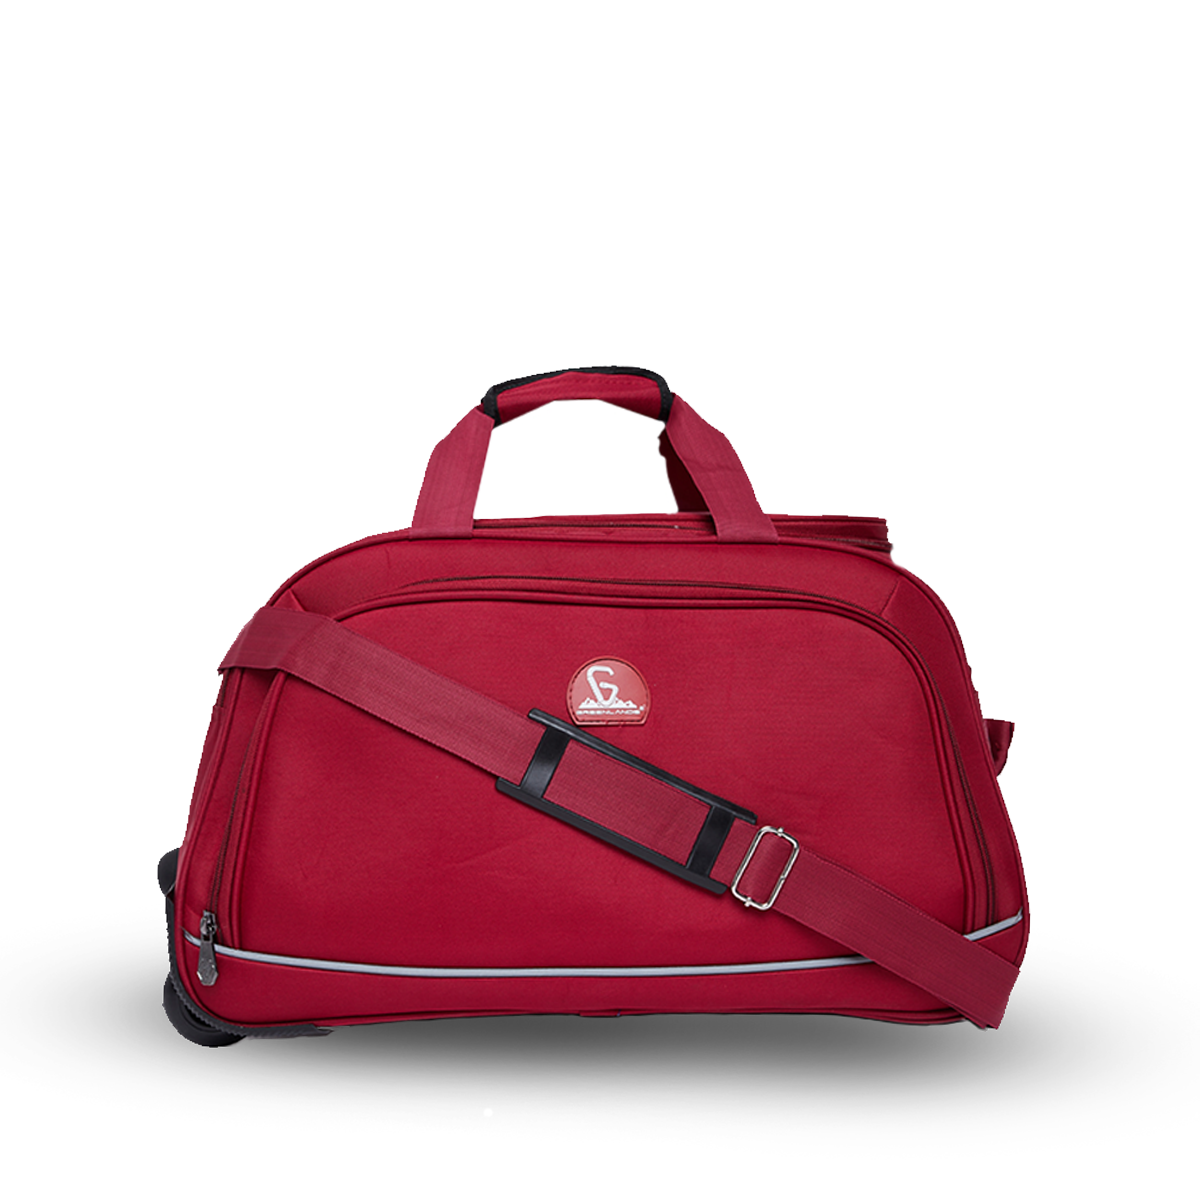 Nifty Duffle Bag Red 45 ltr